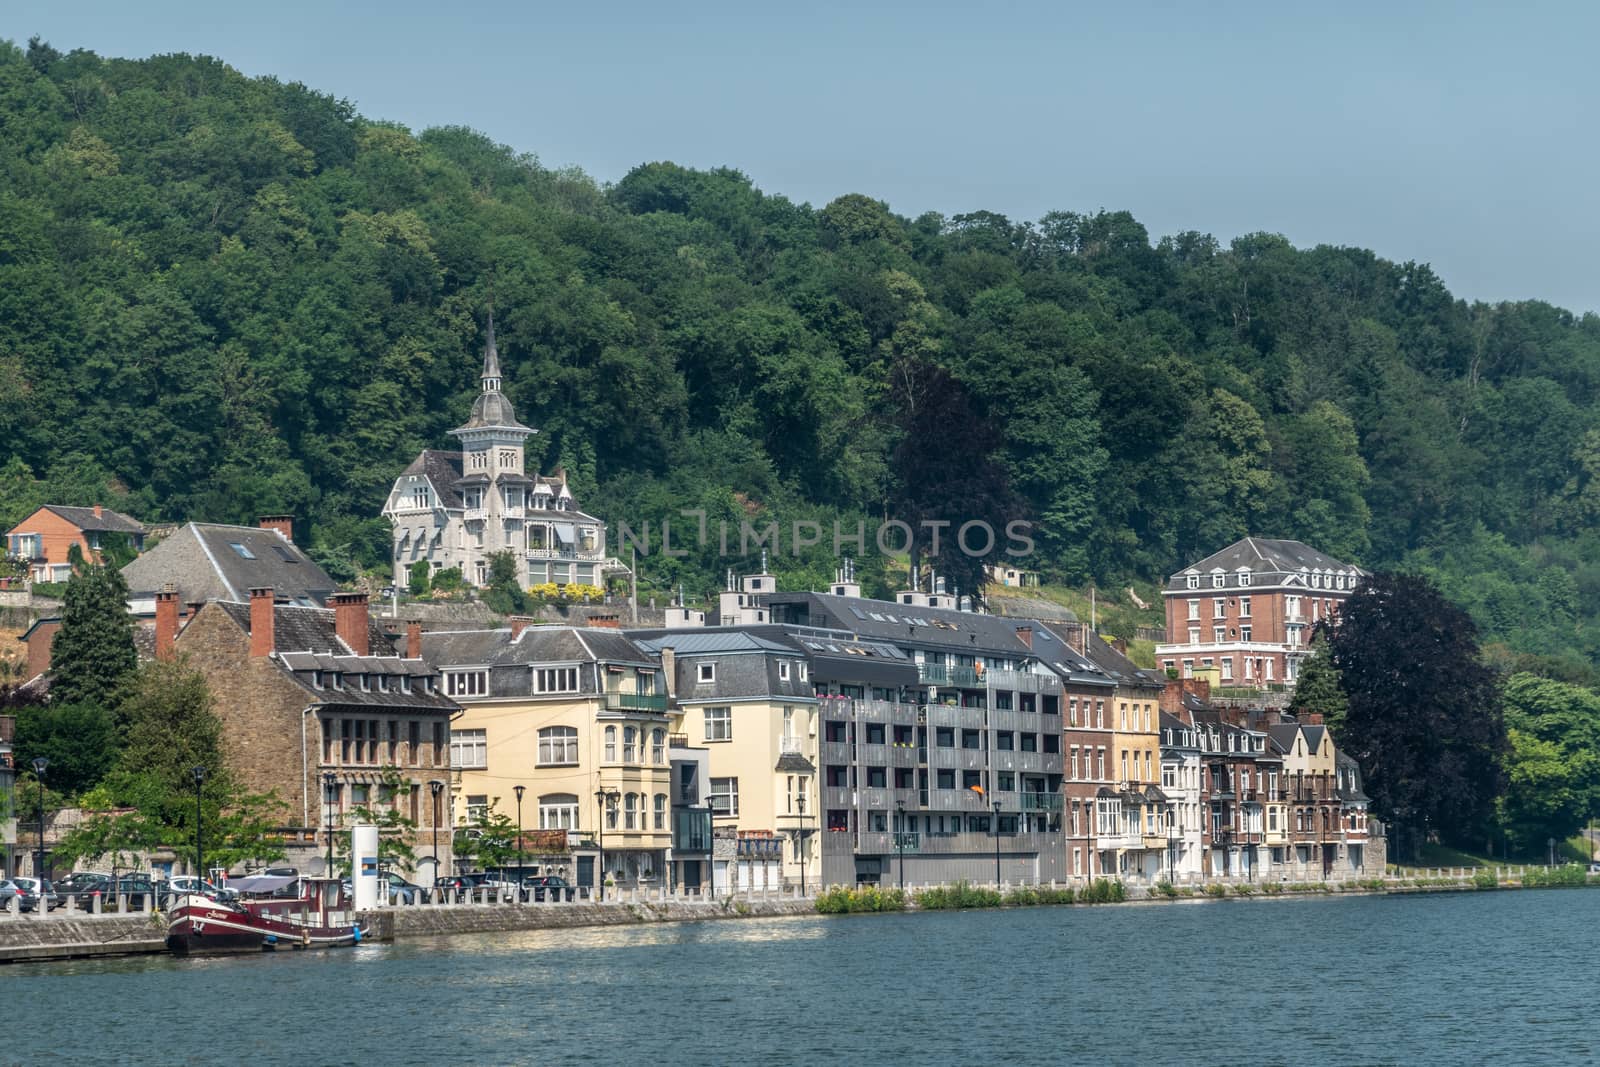 Dinant, Belgium - June 26, 2019: Left bank, north flow of Meuse River with buildings backed by green foliage and blue sky. Tower on mansion in forest foliage.